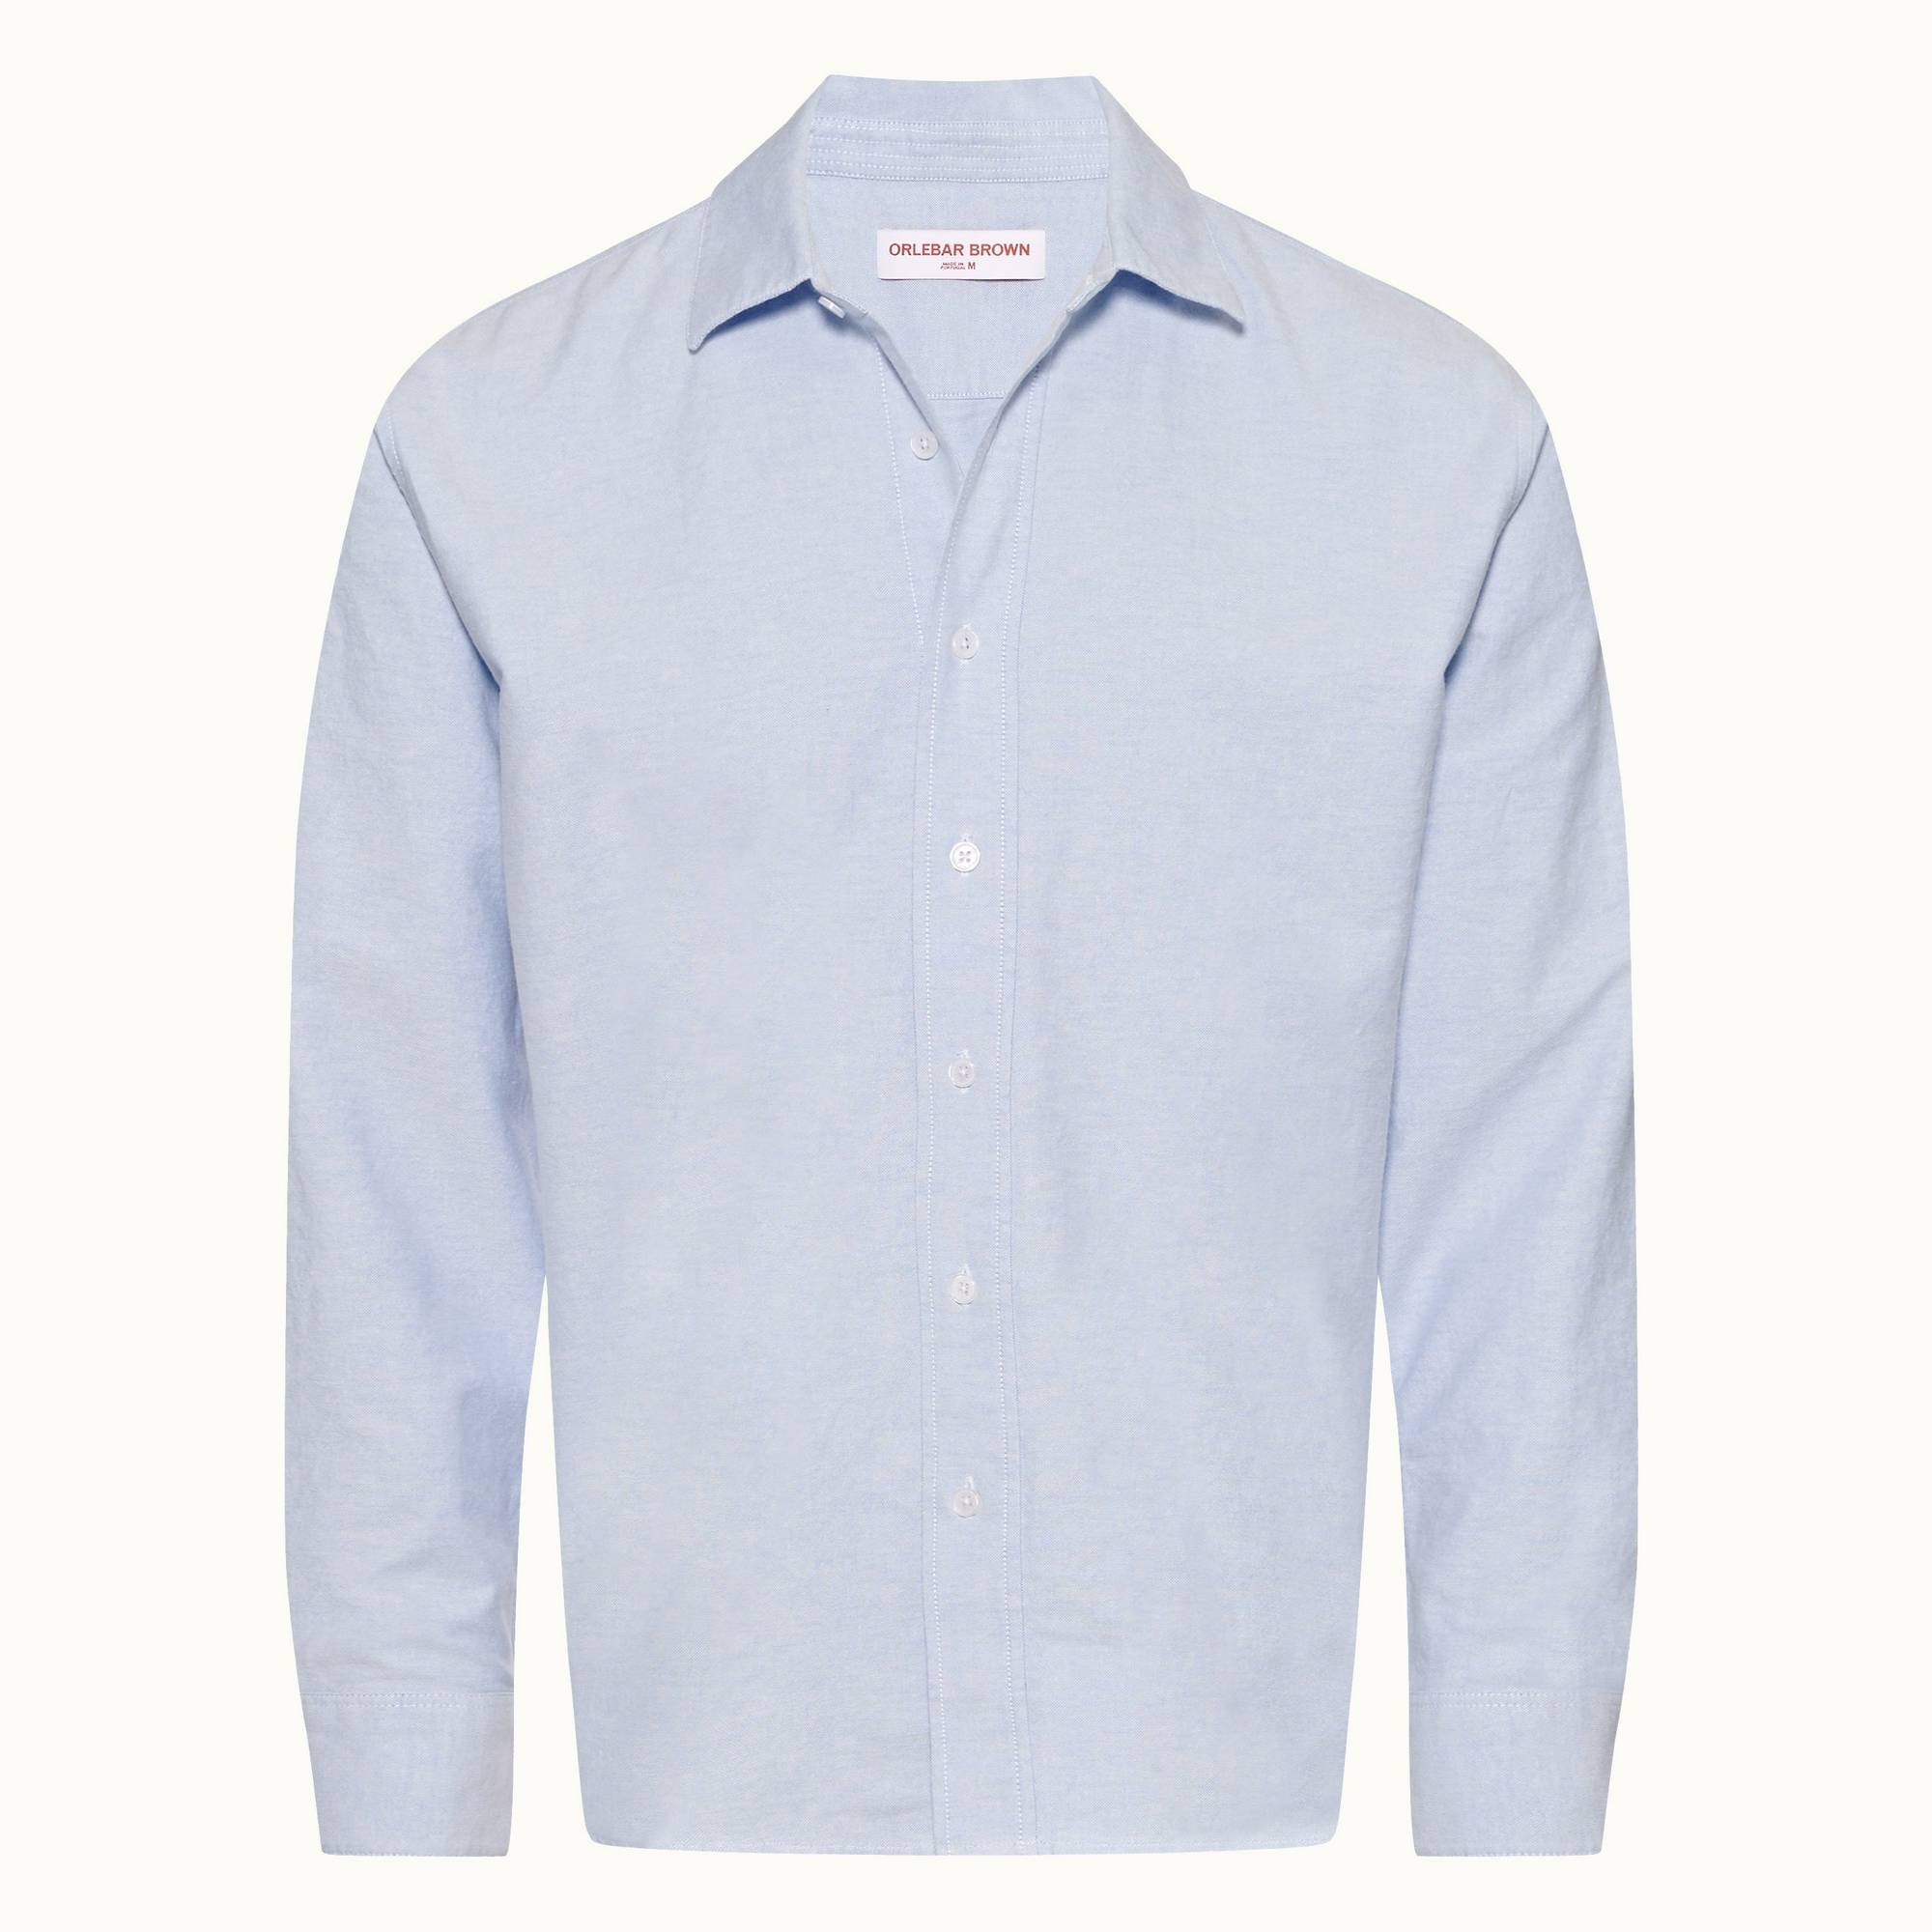 Grasmoor - Mens Serenity Blue Relaxed Fit Classic Collar Washed Oxford Cotton Shirt